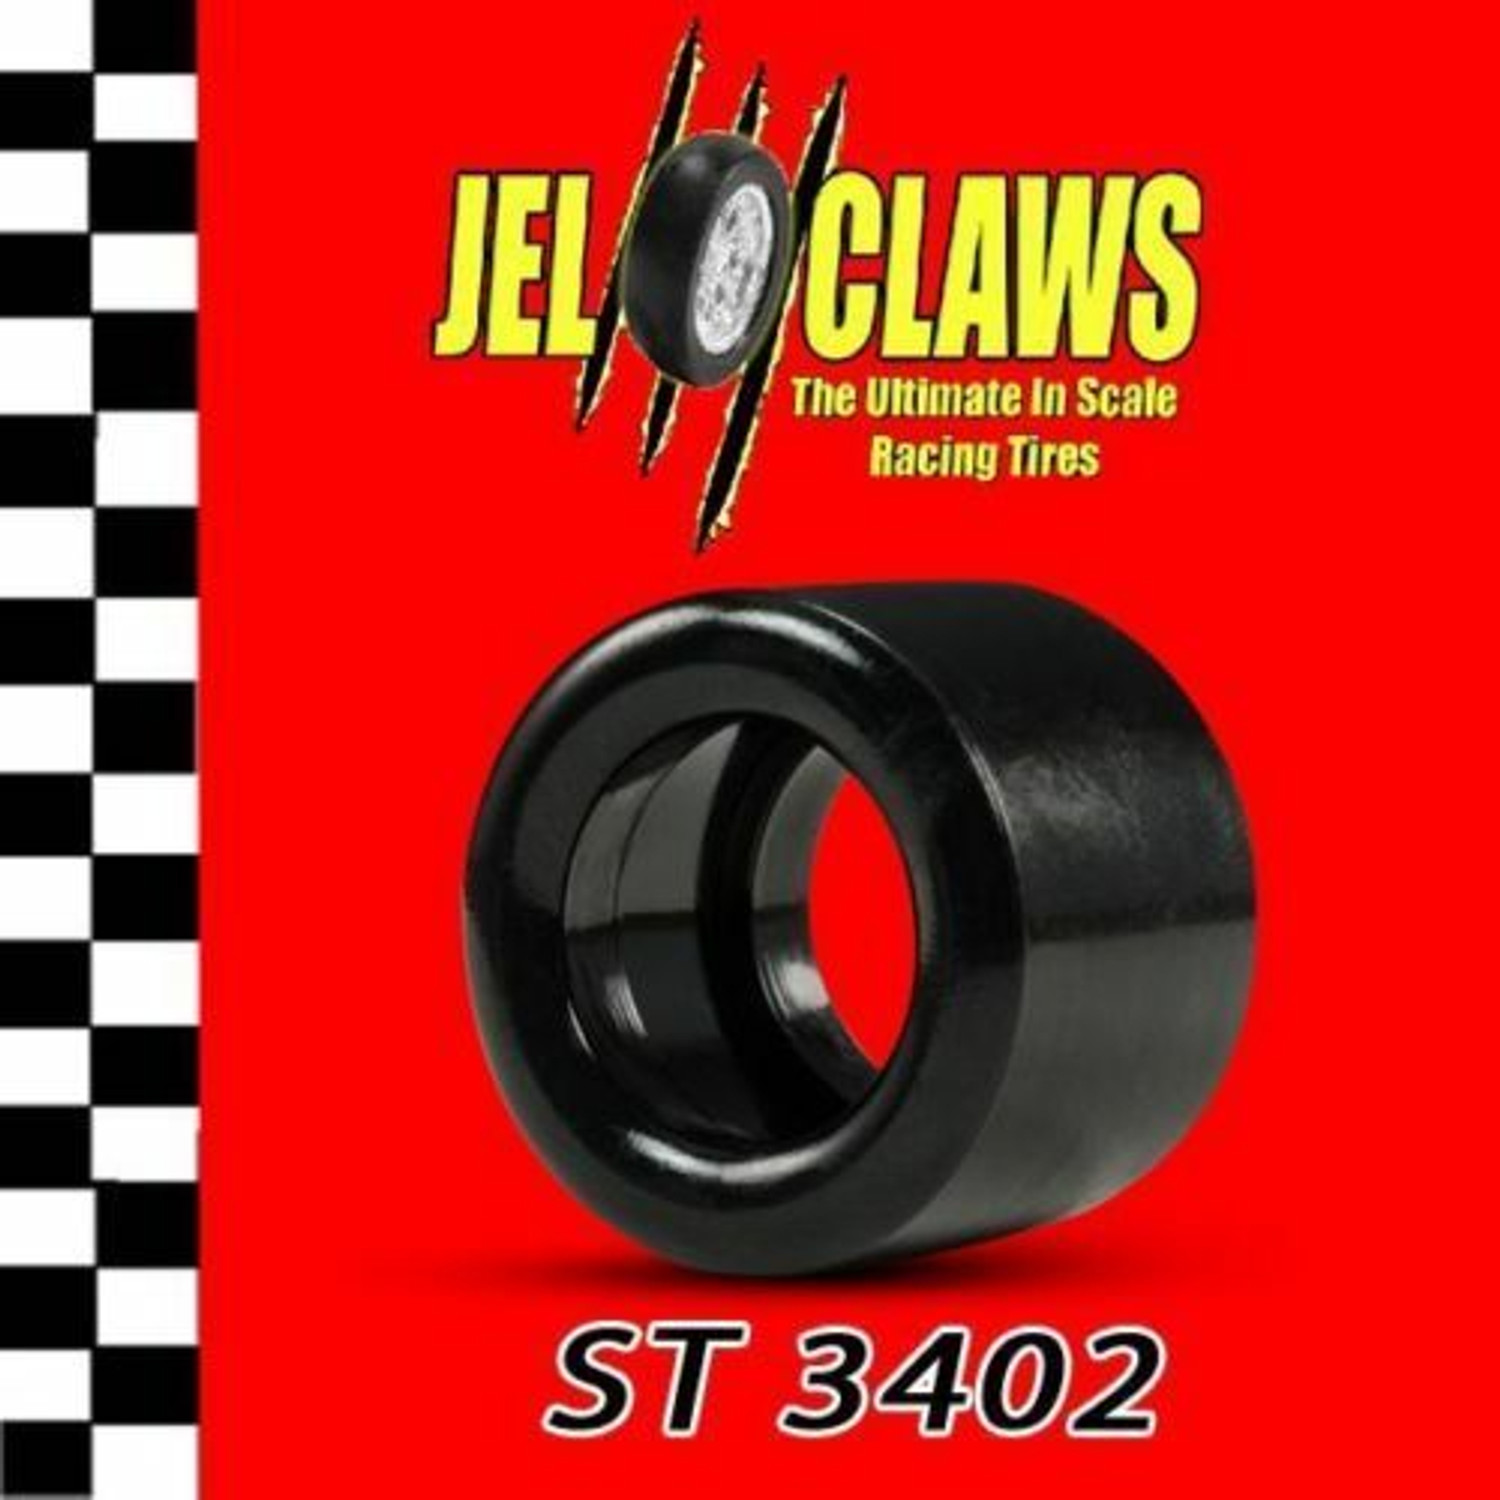 ST 3402 1/24 Scale Slot Car Tires for H & R Racing Chassis (Rears)